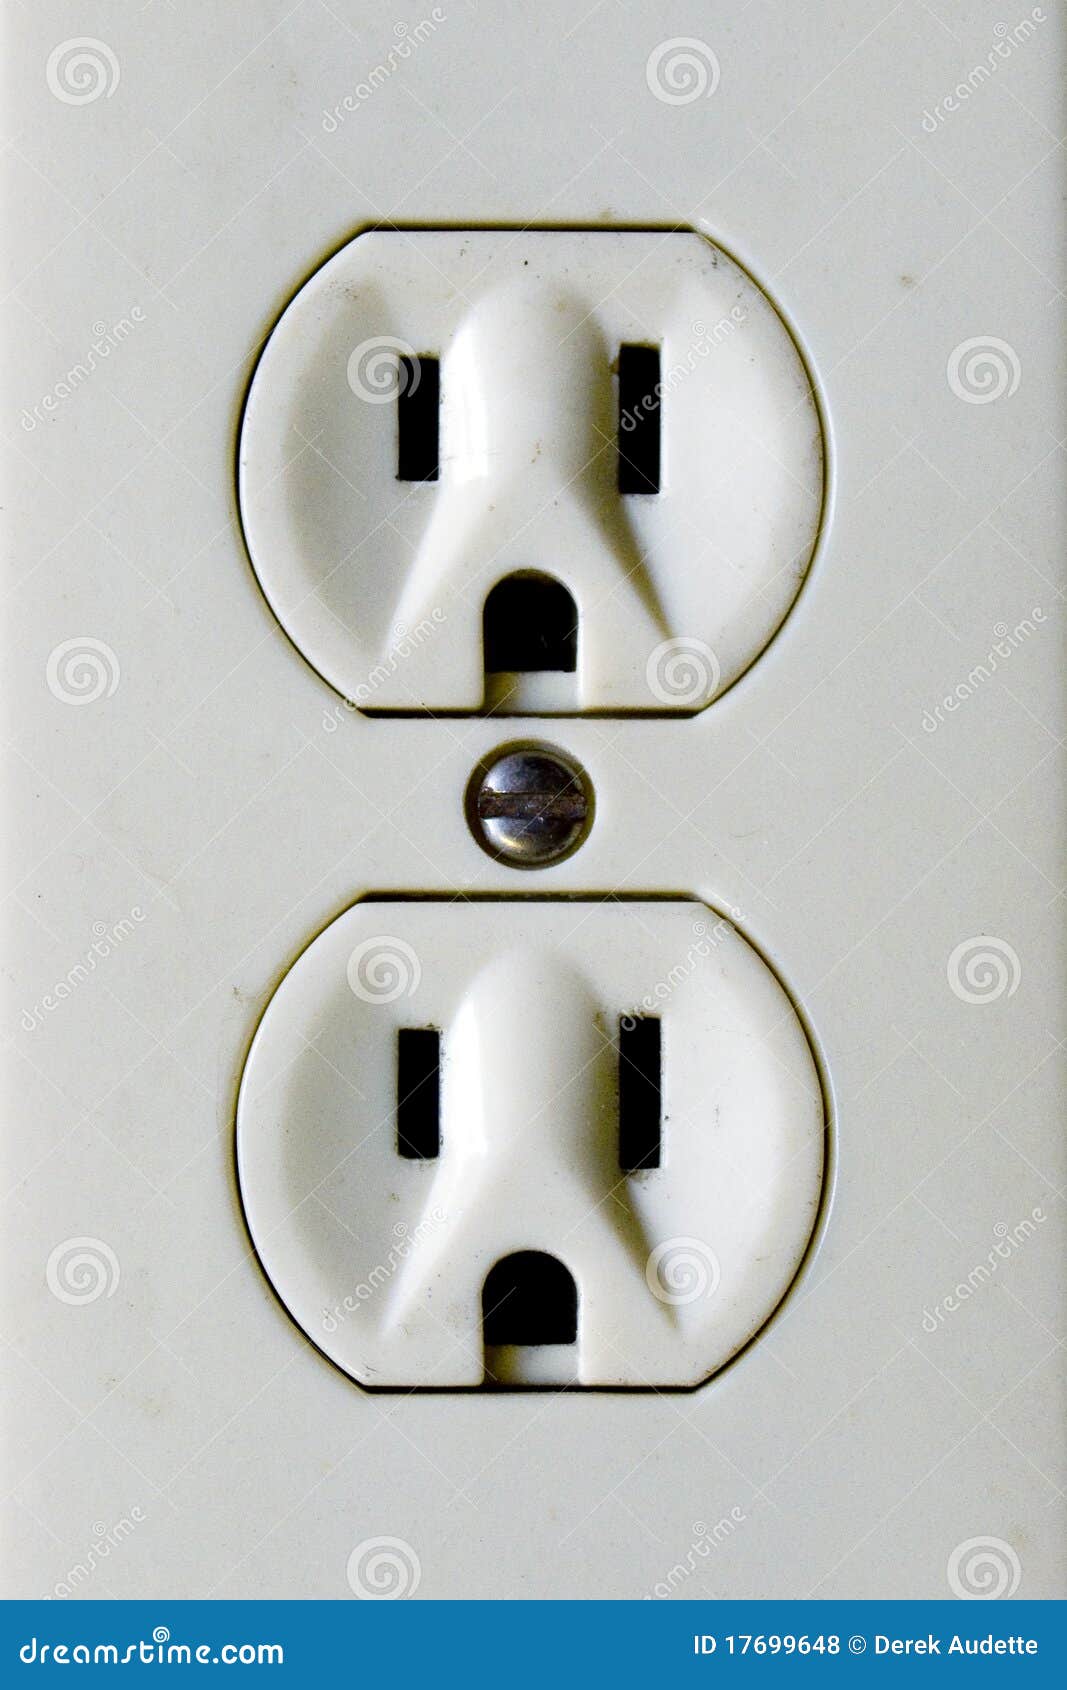 electrical outlets close-up